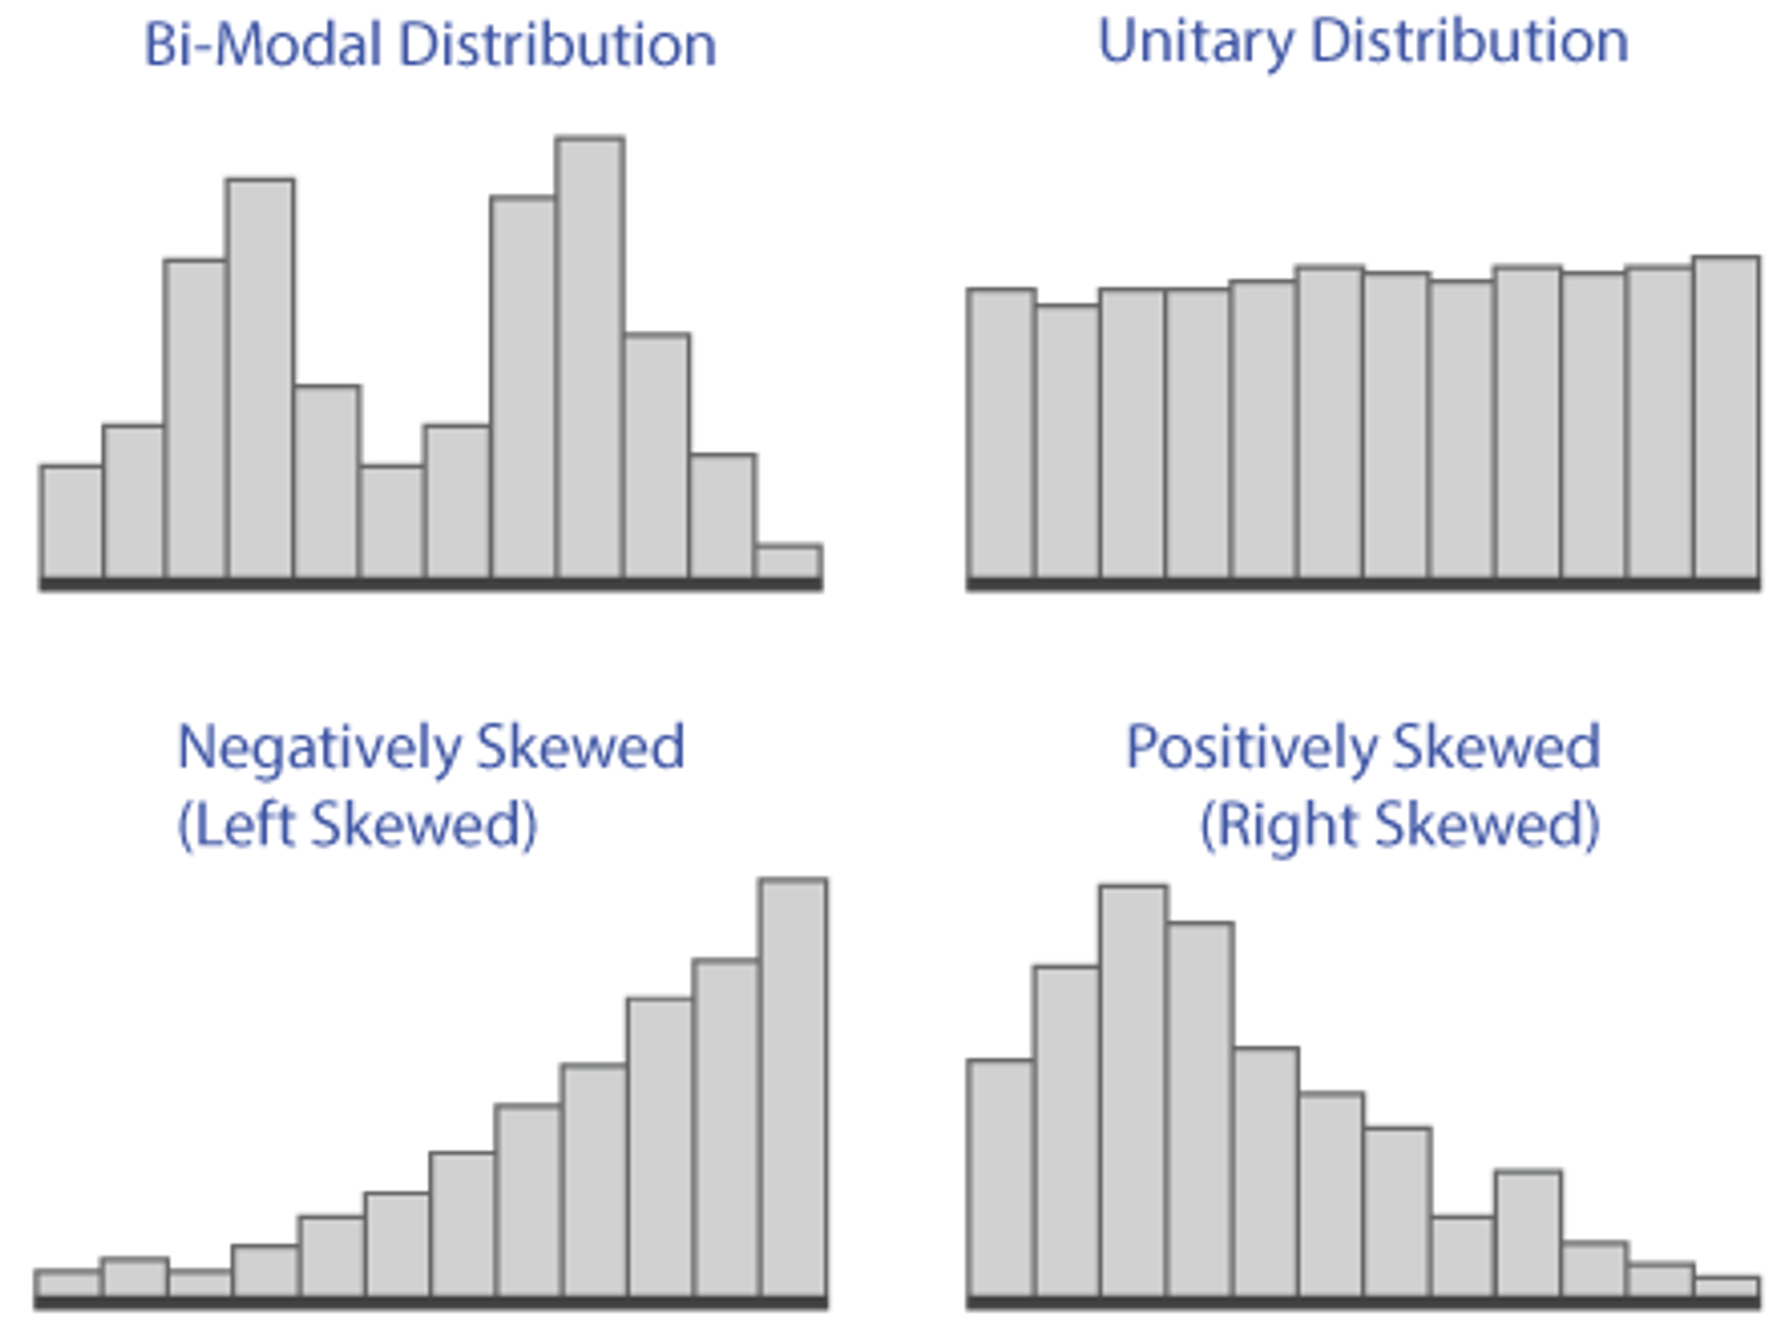 Image Showing Histograms of Different Distributions